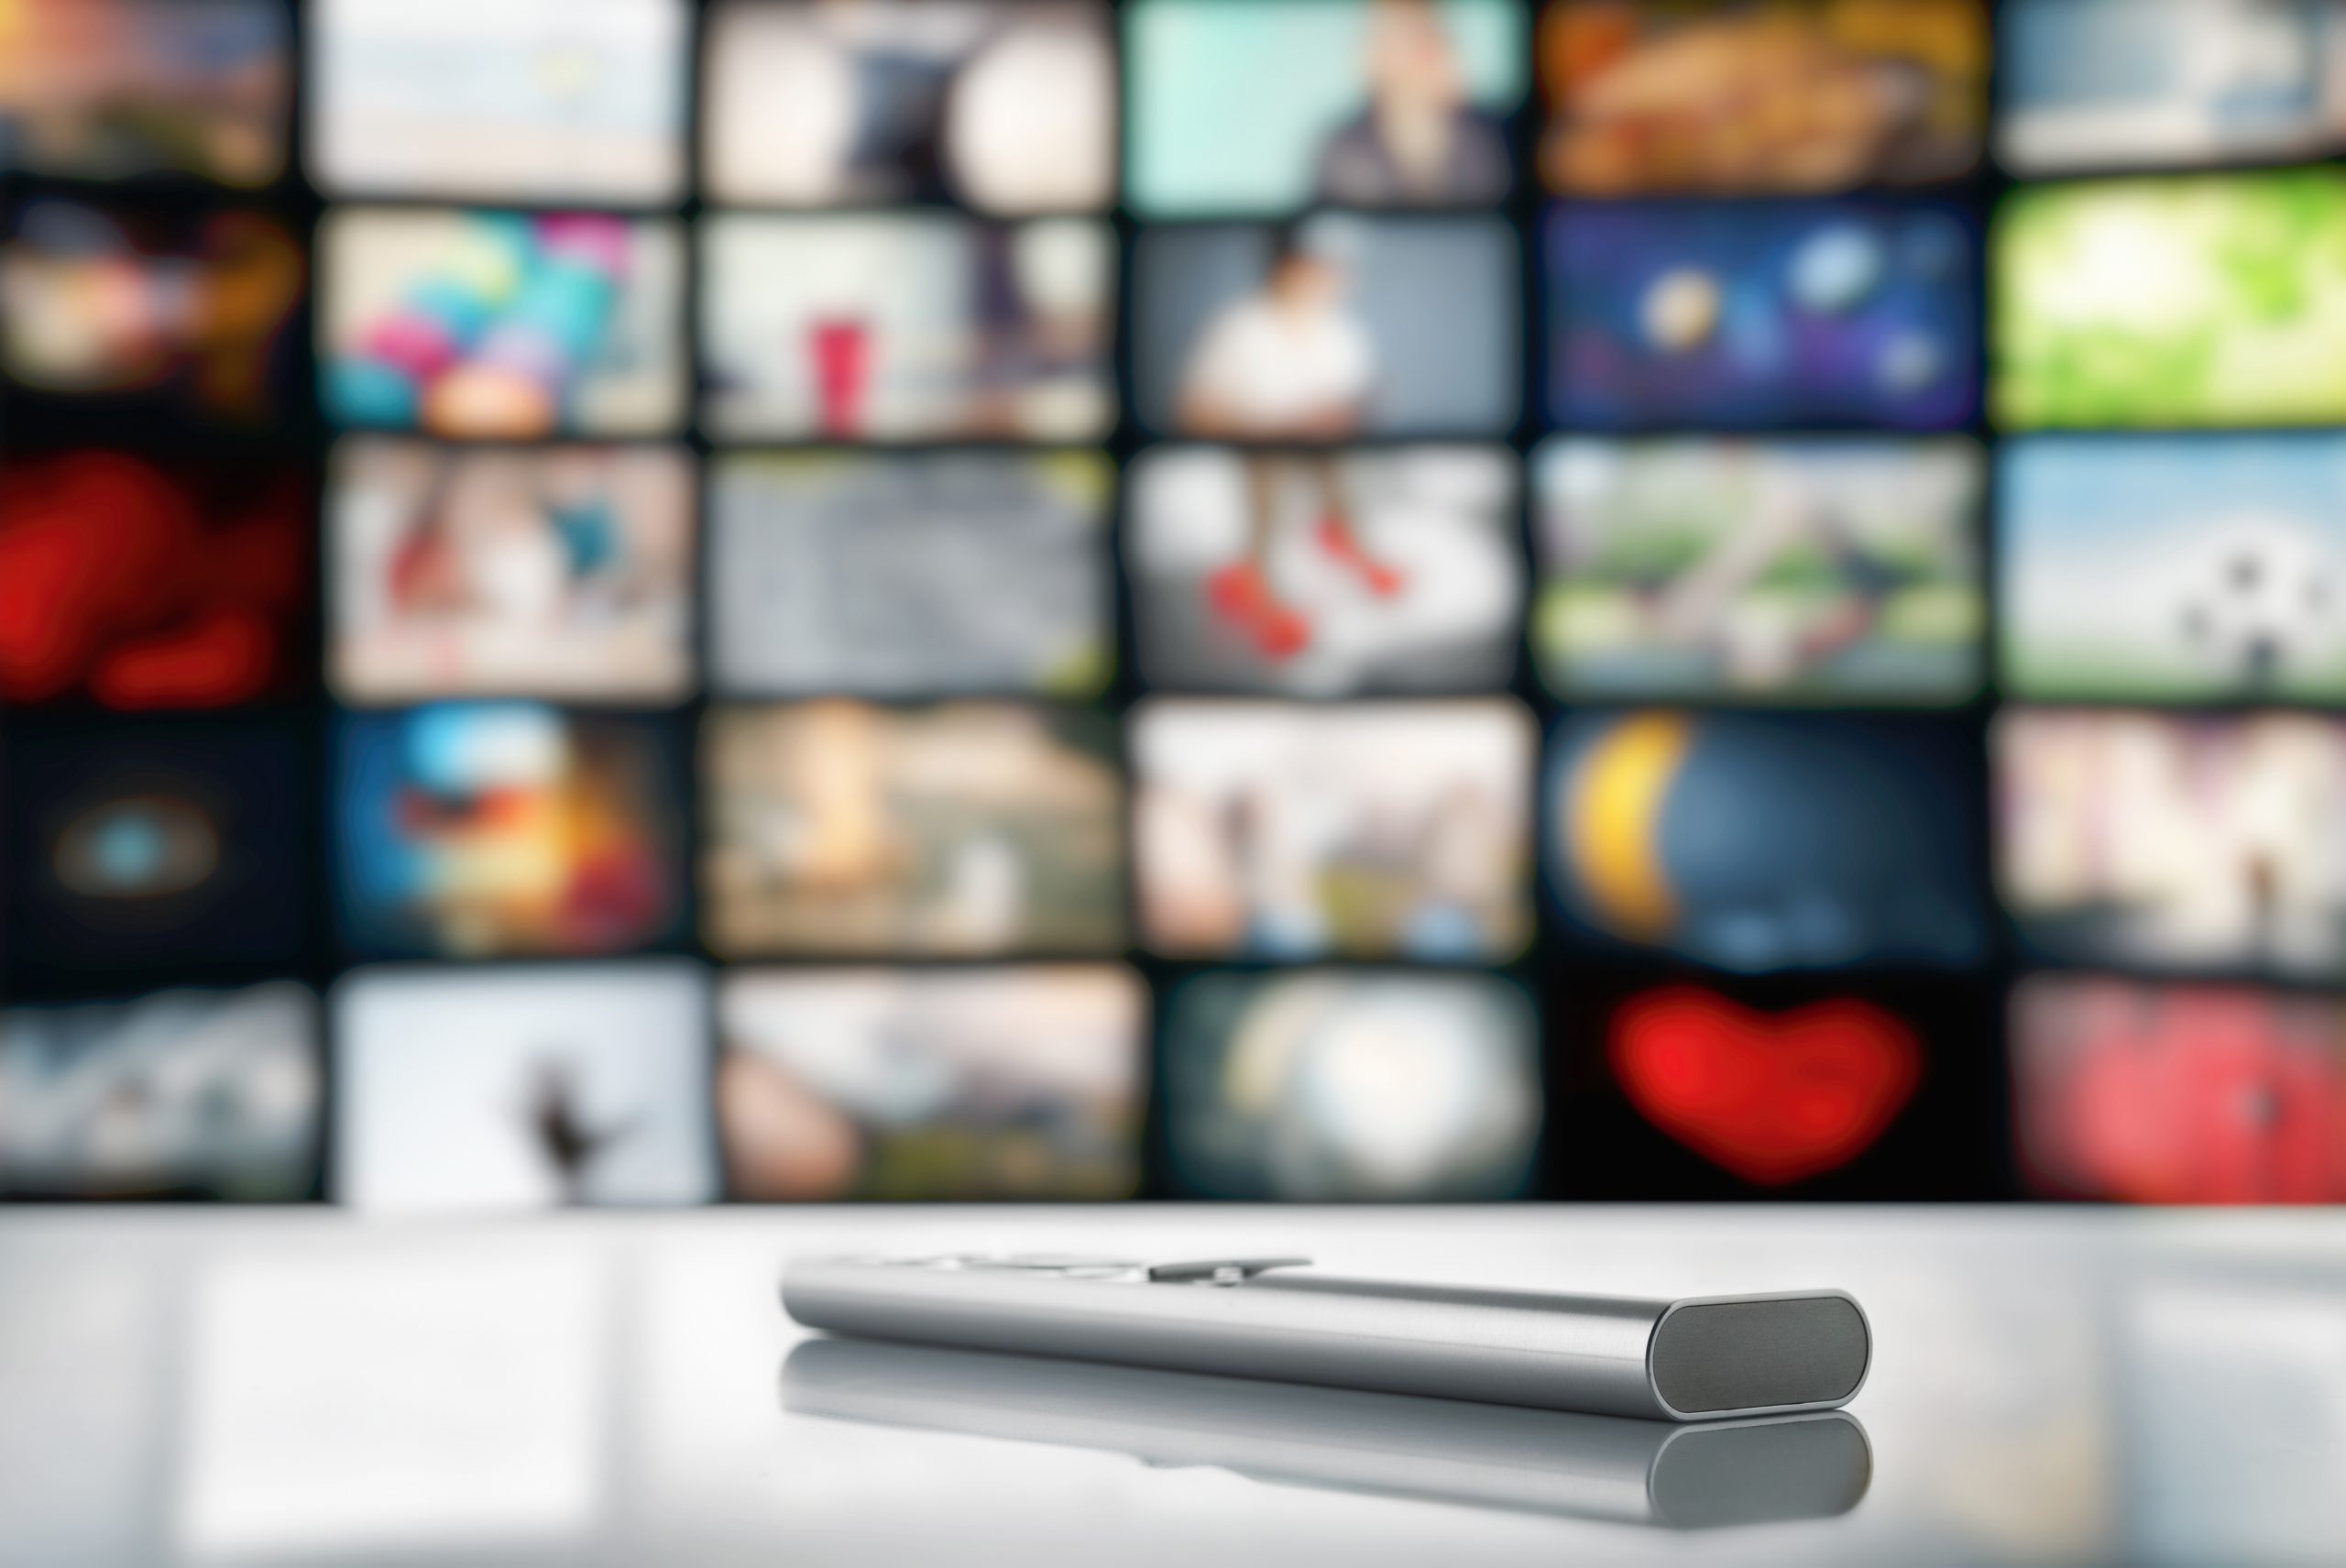 TV Ad Volume Up 89 Percent Over 2014